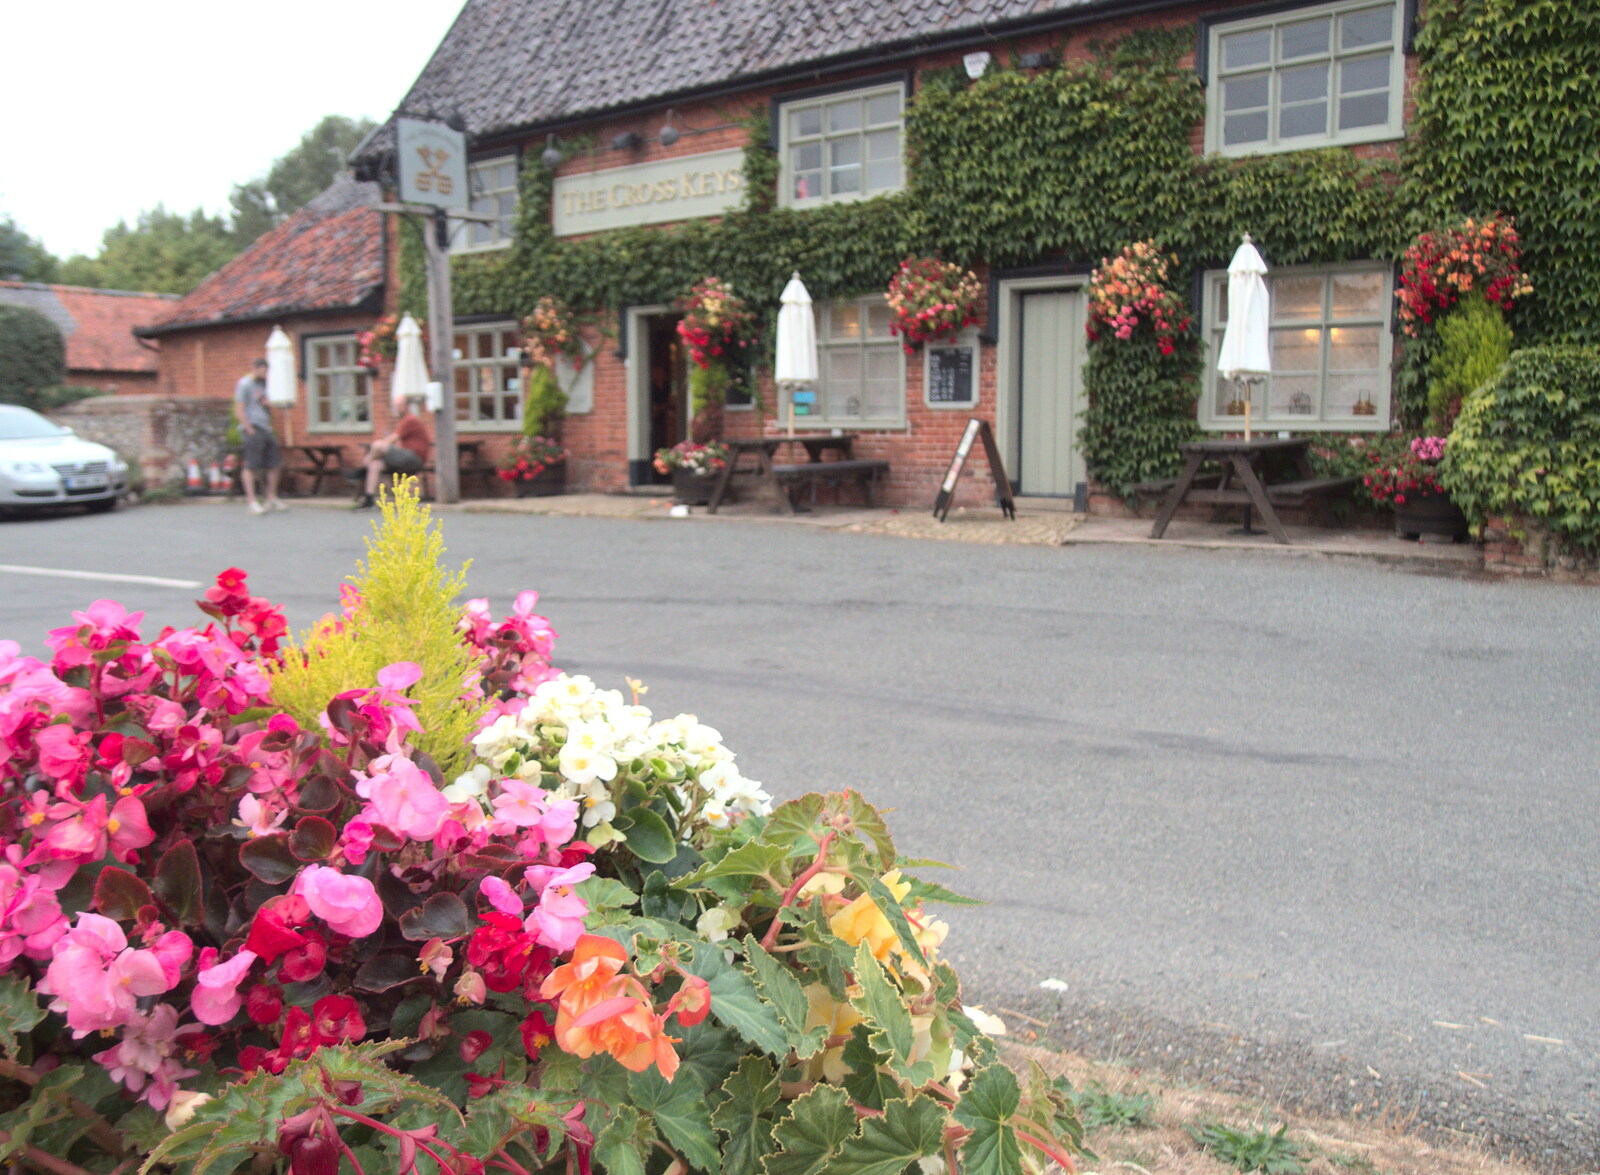 The BSCC at the Cross Keys, Redgrave, Suffolk - 25th August 2022: Flower pots on the green